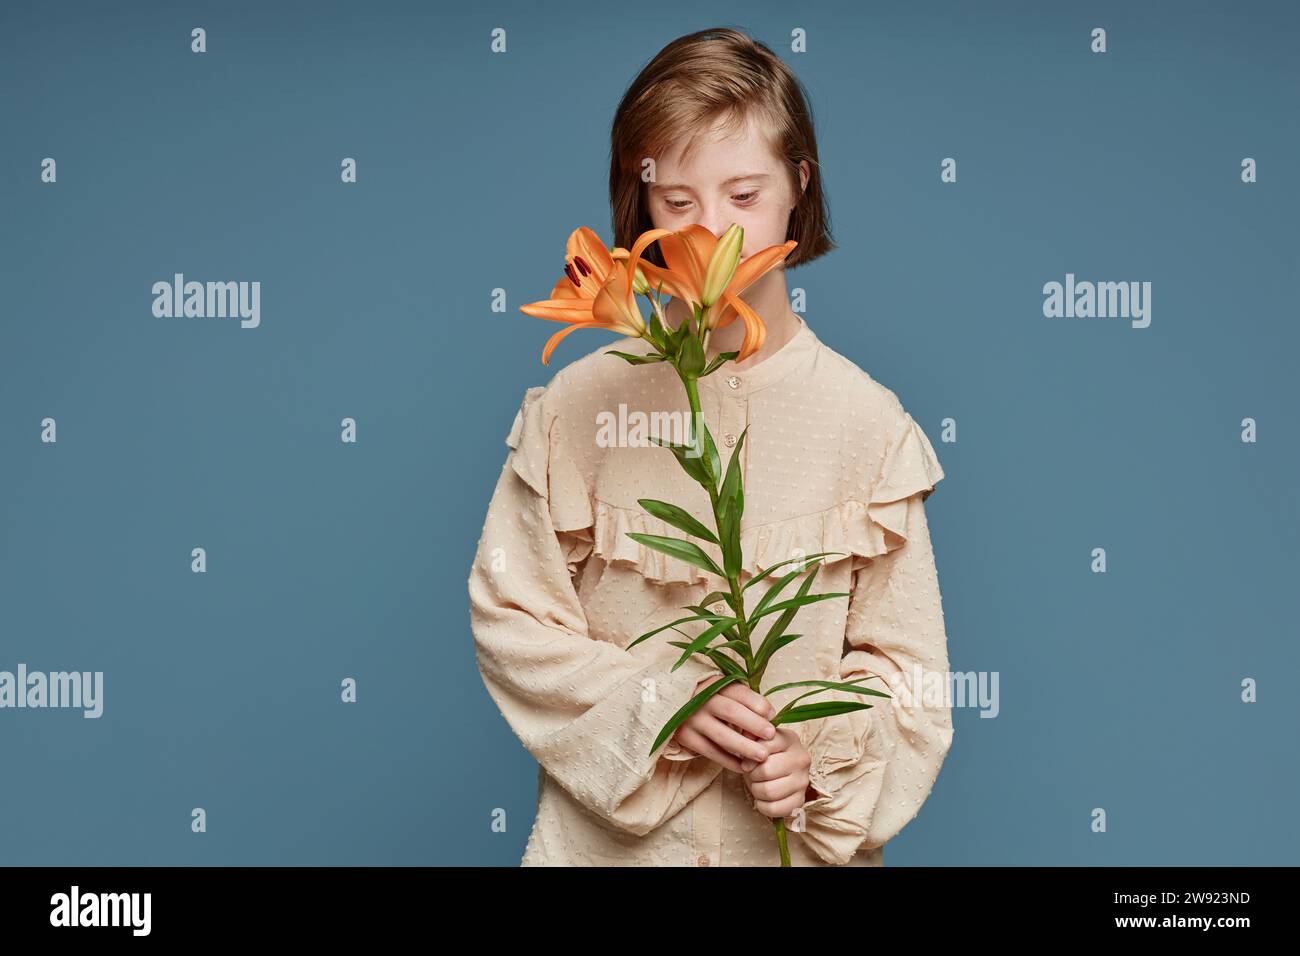 Teenage girl smelling orchid flowers standing against blue background Stock Photo